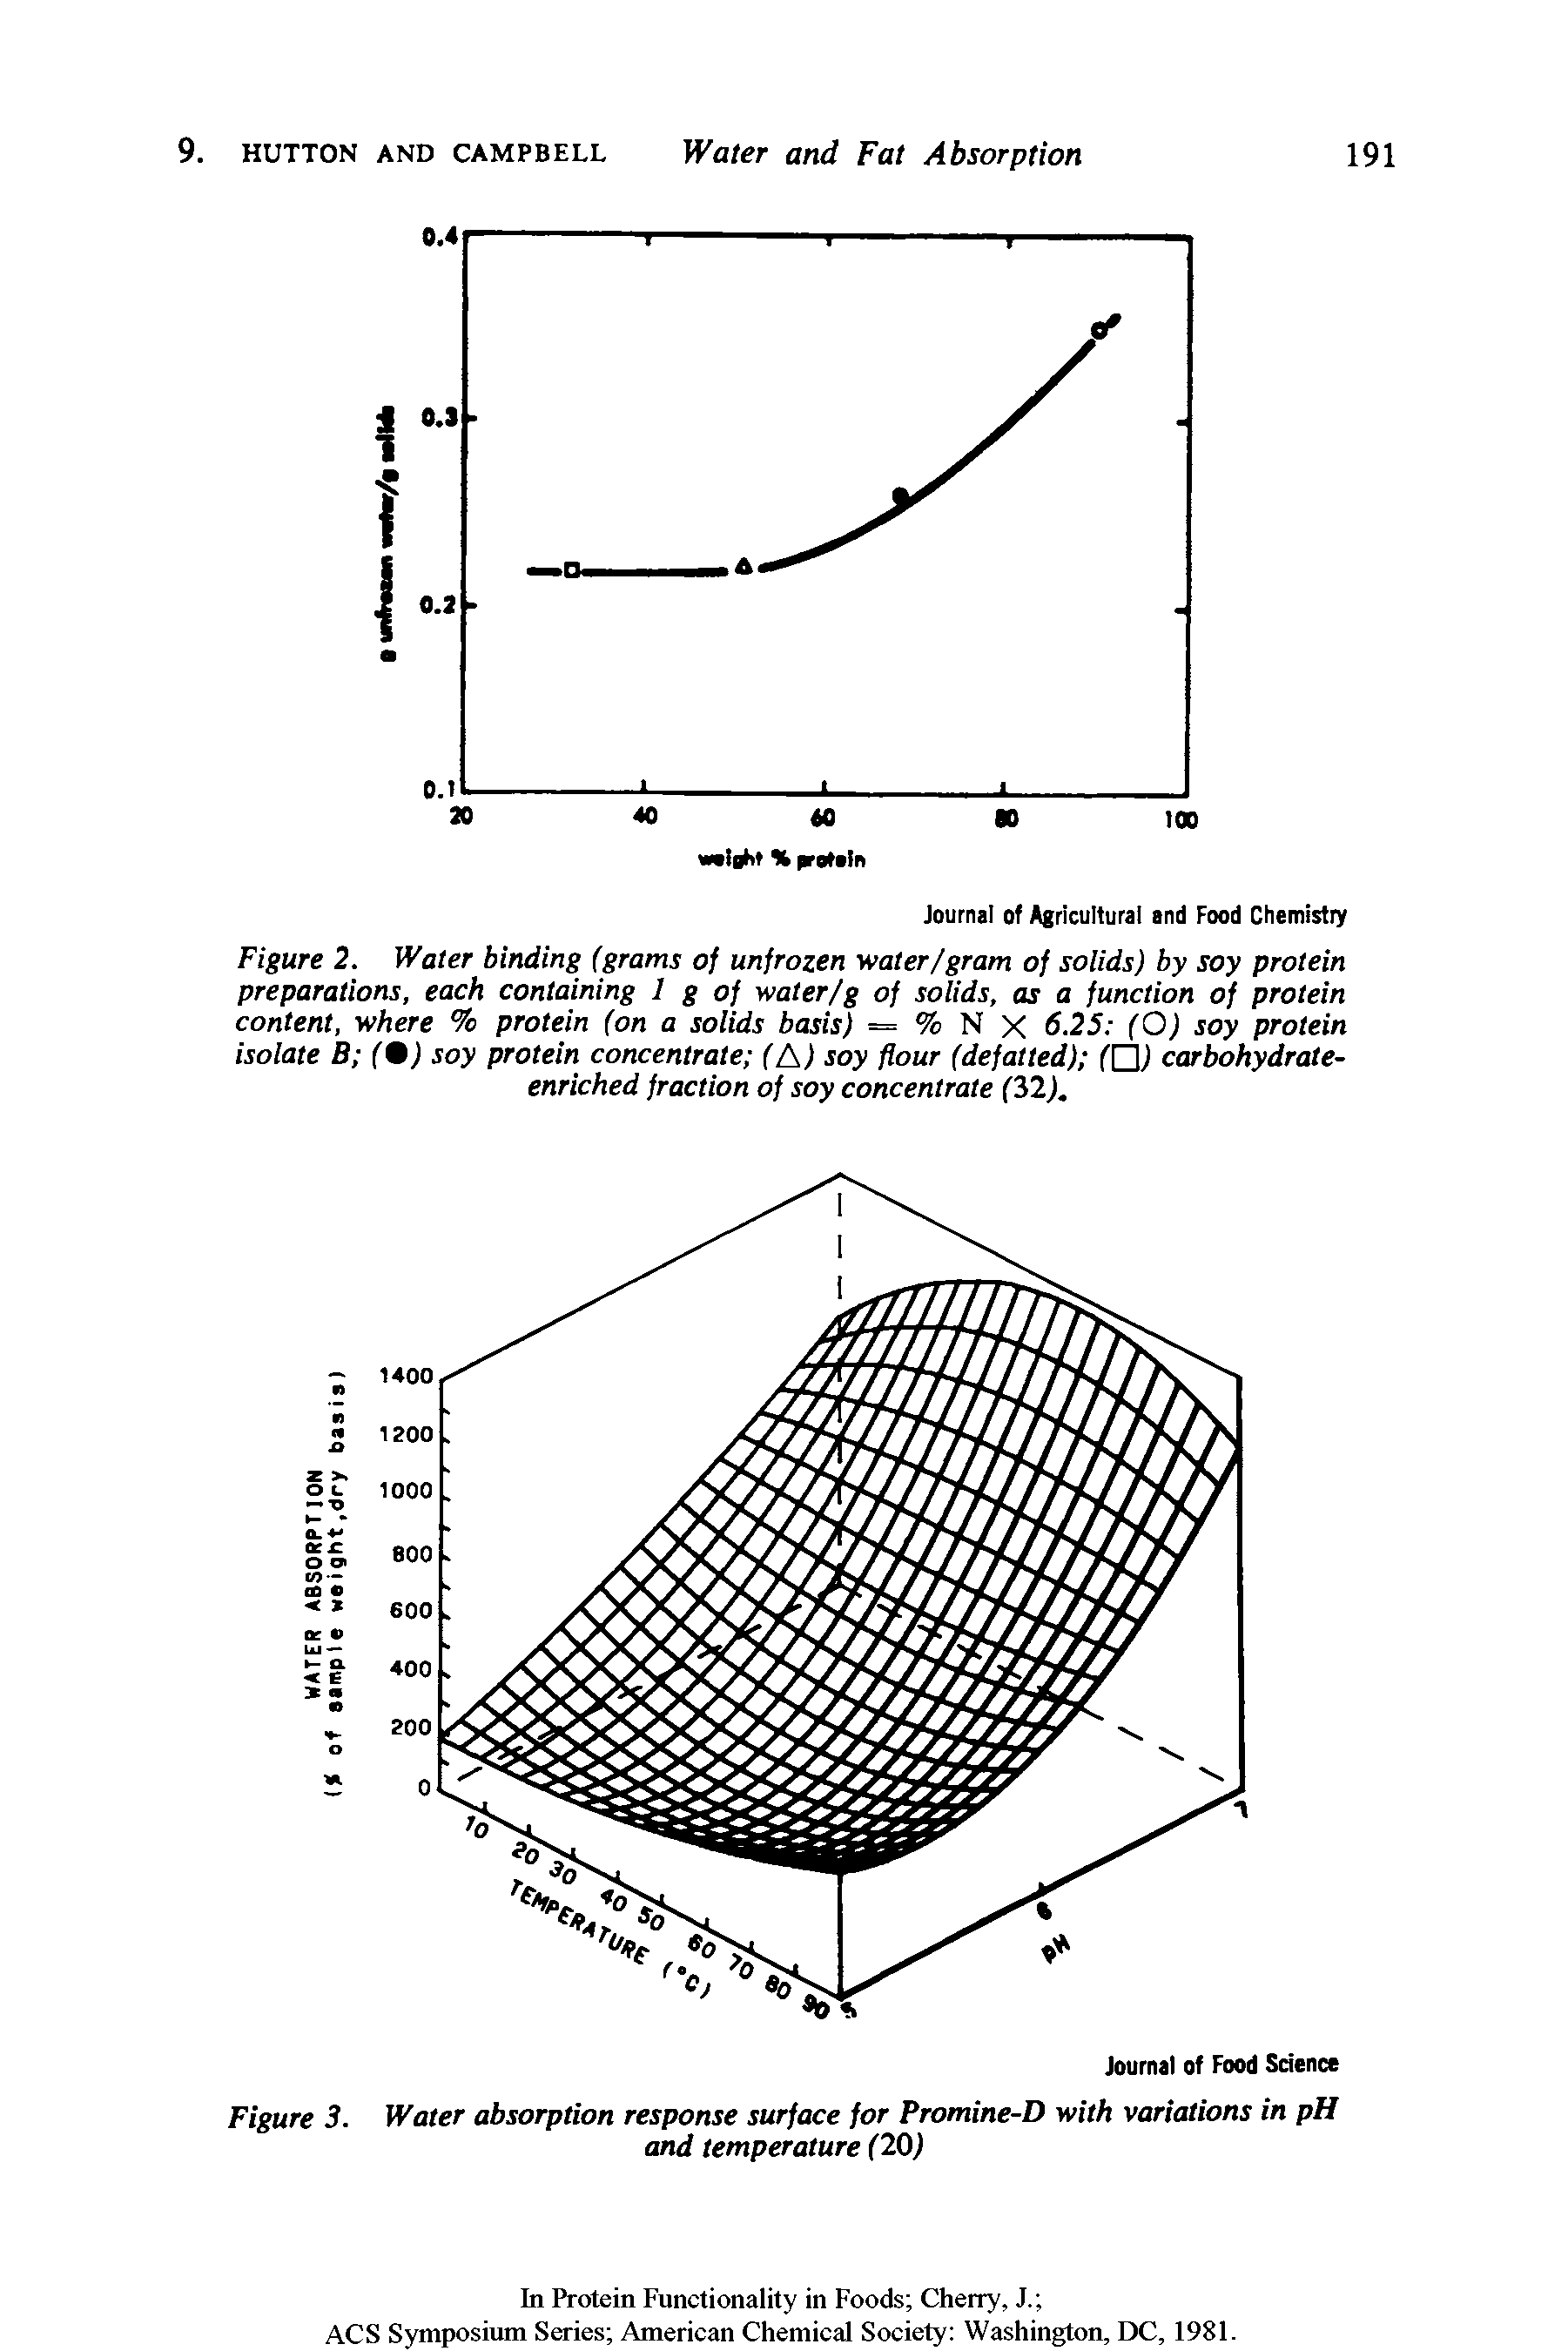 Figure 2. Water binding (grams of unfrozen water/gram of solids) by soy protein preparations, each containing 1 g of water/g of solids, as a function of protein content, where % protein (on a solids basis) = % N X 6.25 (O) soy protein isolate B (9) soy protein concentrate (/ ) soy flour (defatted) fCJl carbohydrate-enriched fraction of soy concentrate f32j.